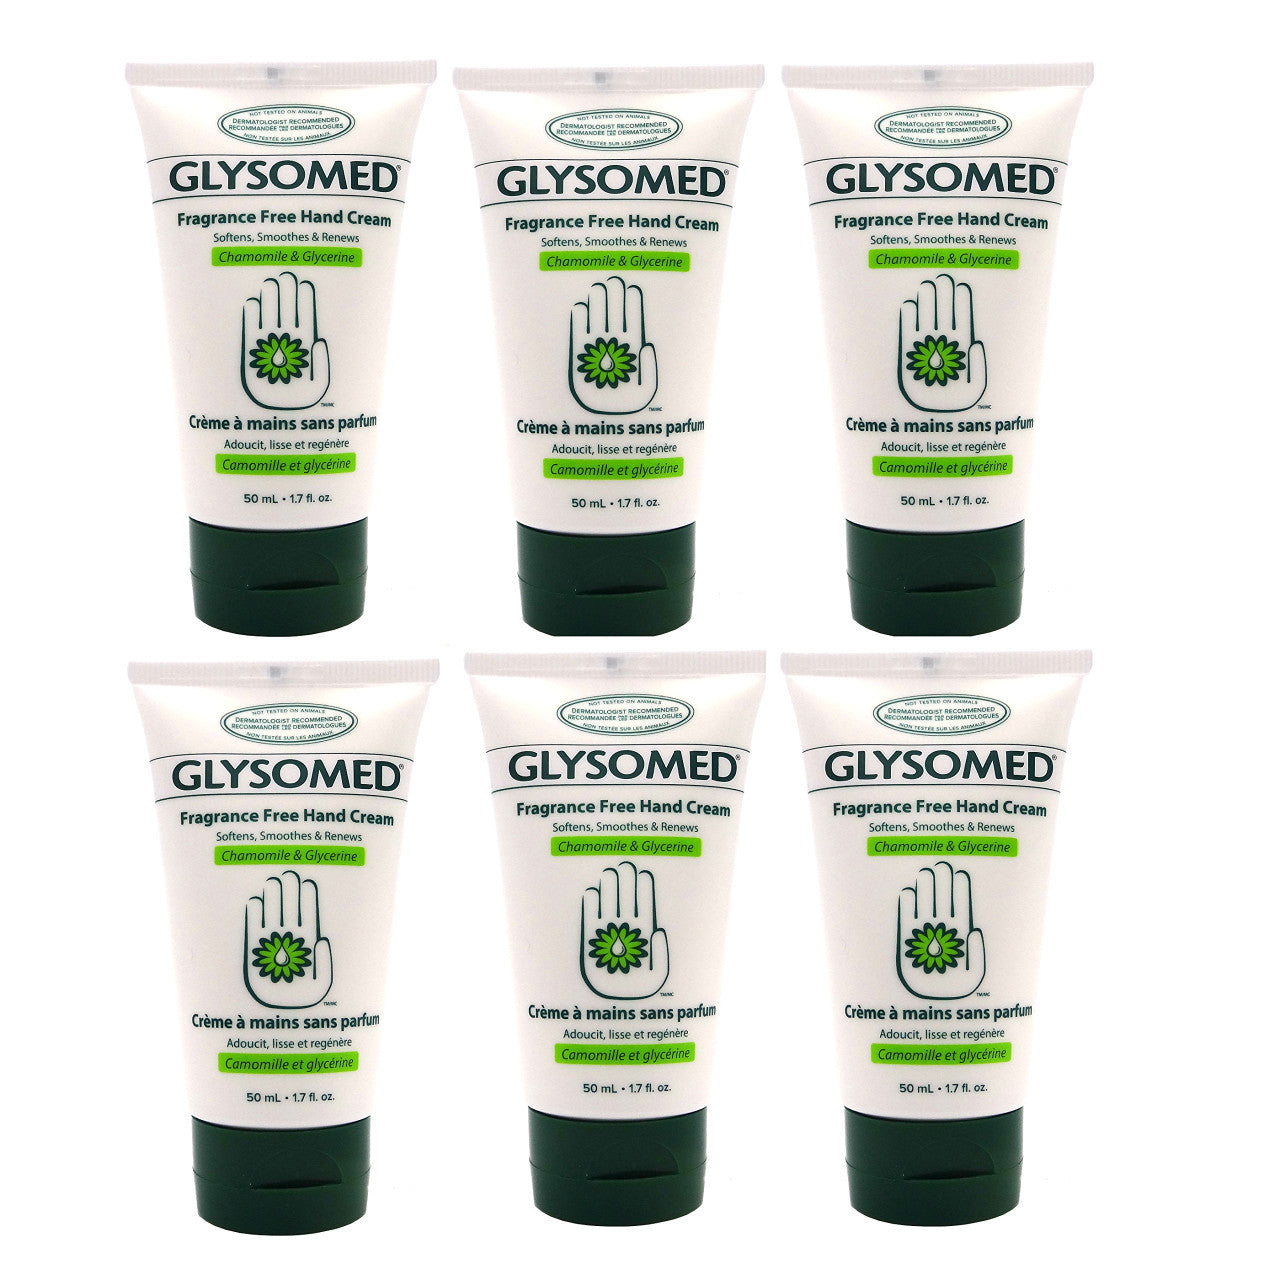 Glysomed Hand Cream, Unscented 1.7 fl oz (50 ml) (6pk){Imported from Canada}